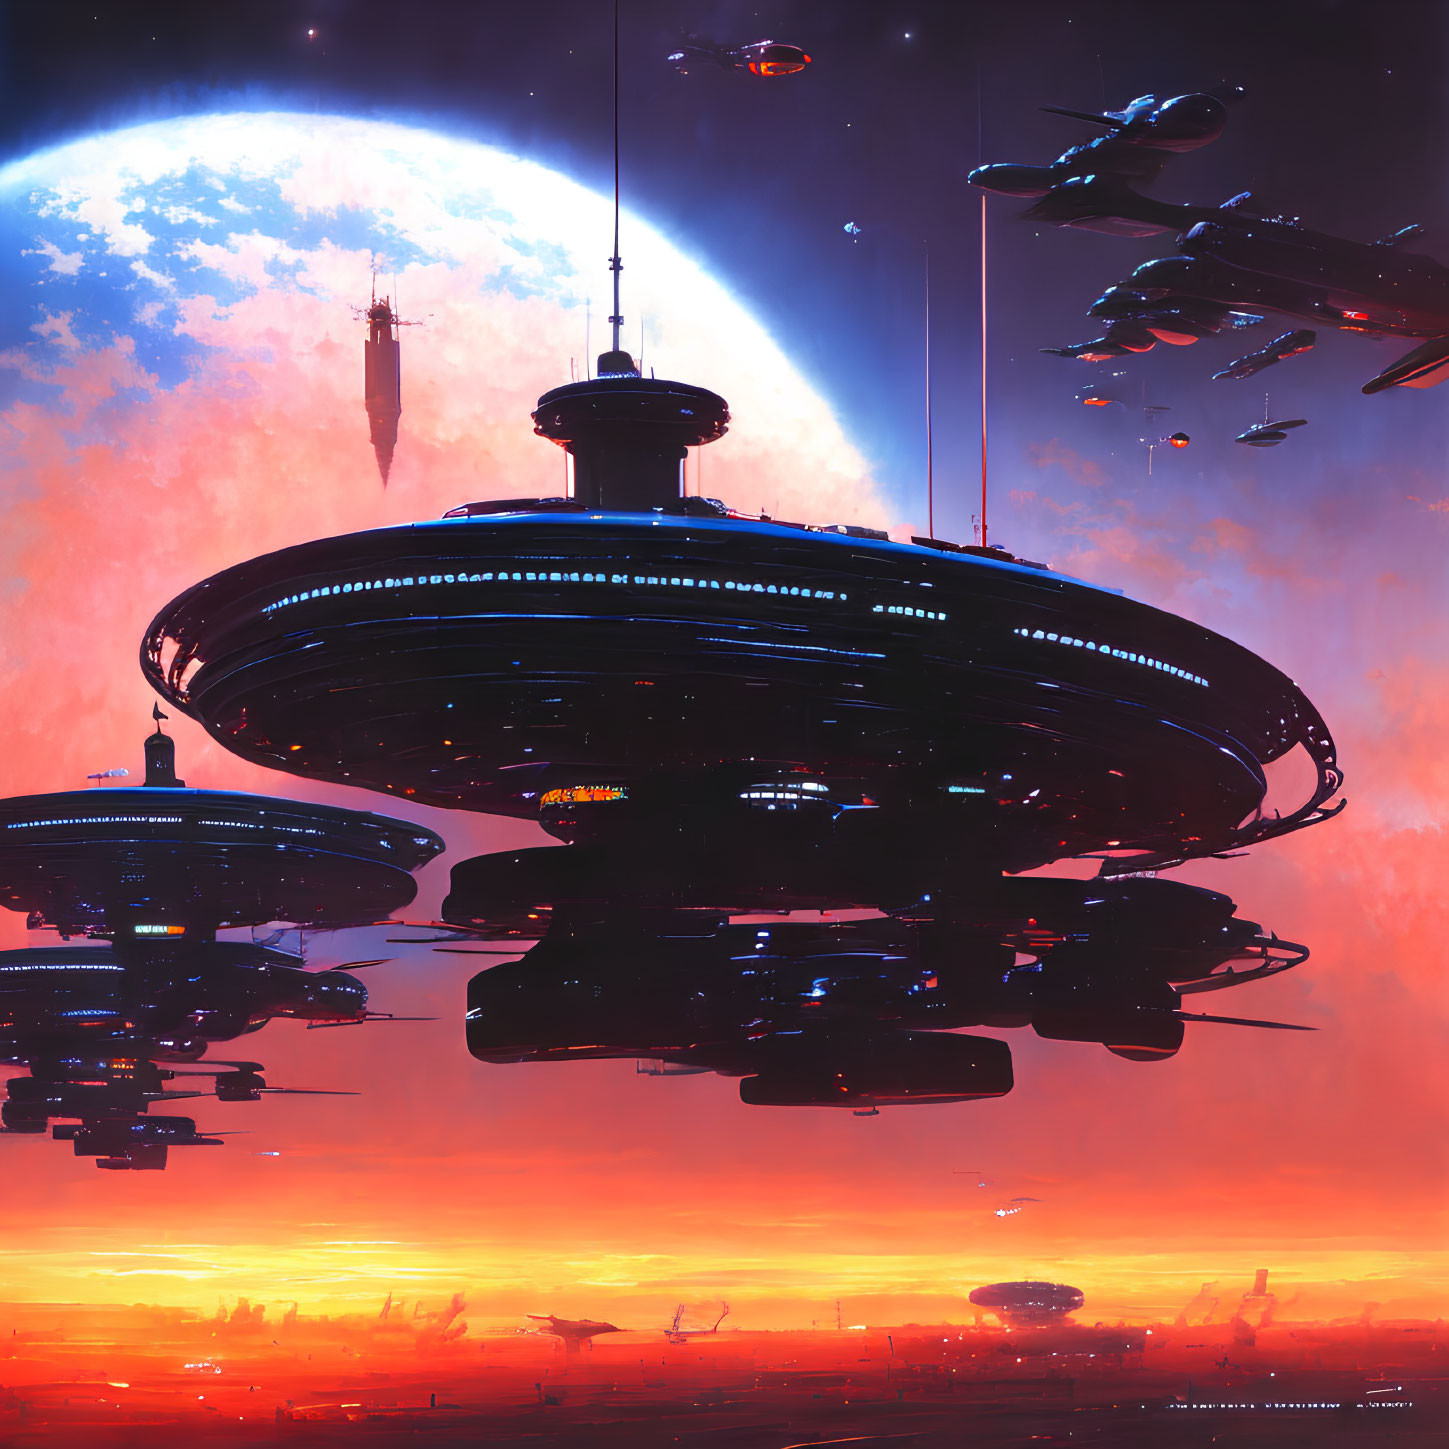 Futuristic cityscape with towering structures and spaceships under an orange sky